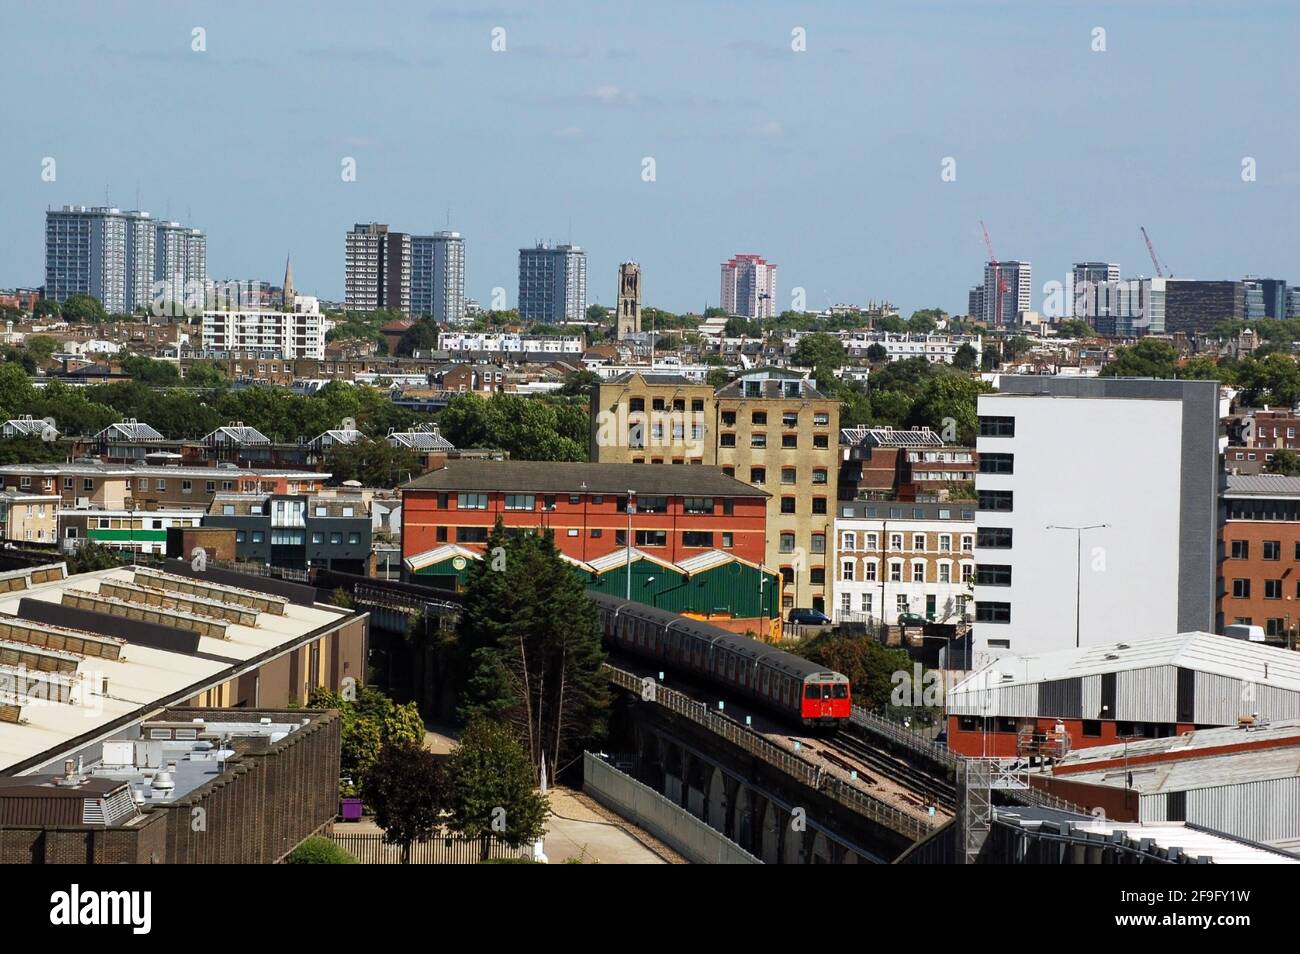 A view from Shepherd's Bush looking across Notting Hill and North Kensington towards the centre of London. A tube train on the Hammersmith and City un Stock Photo